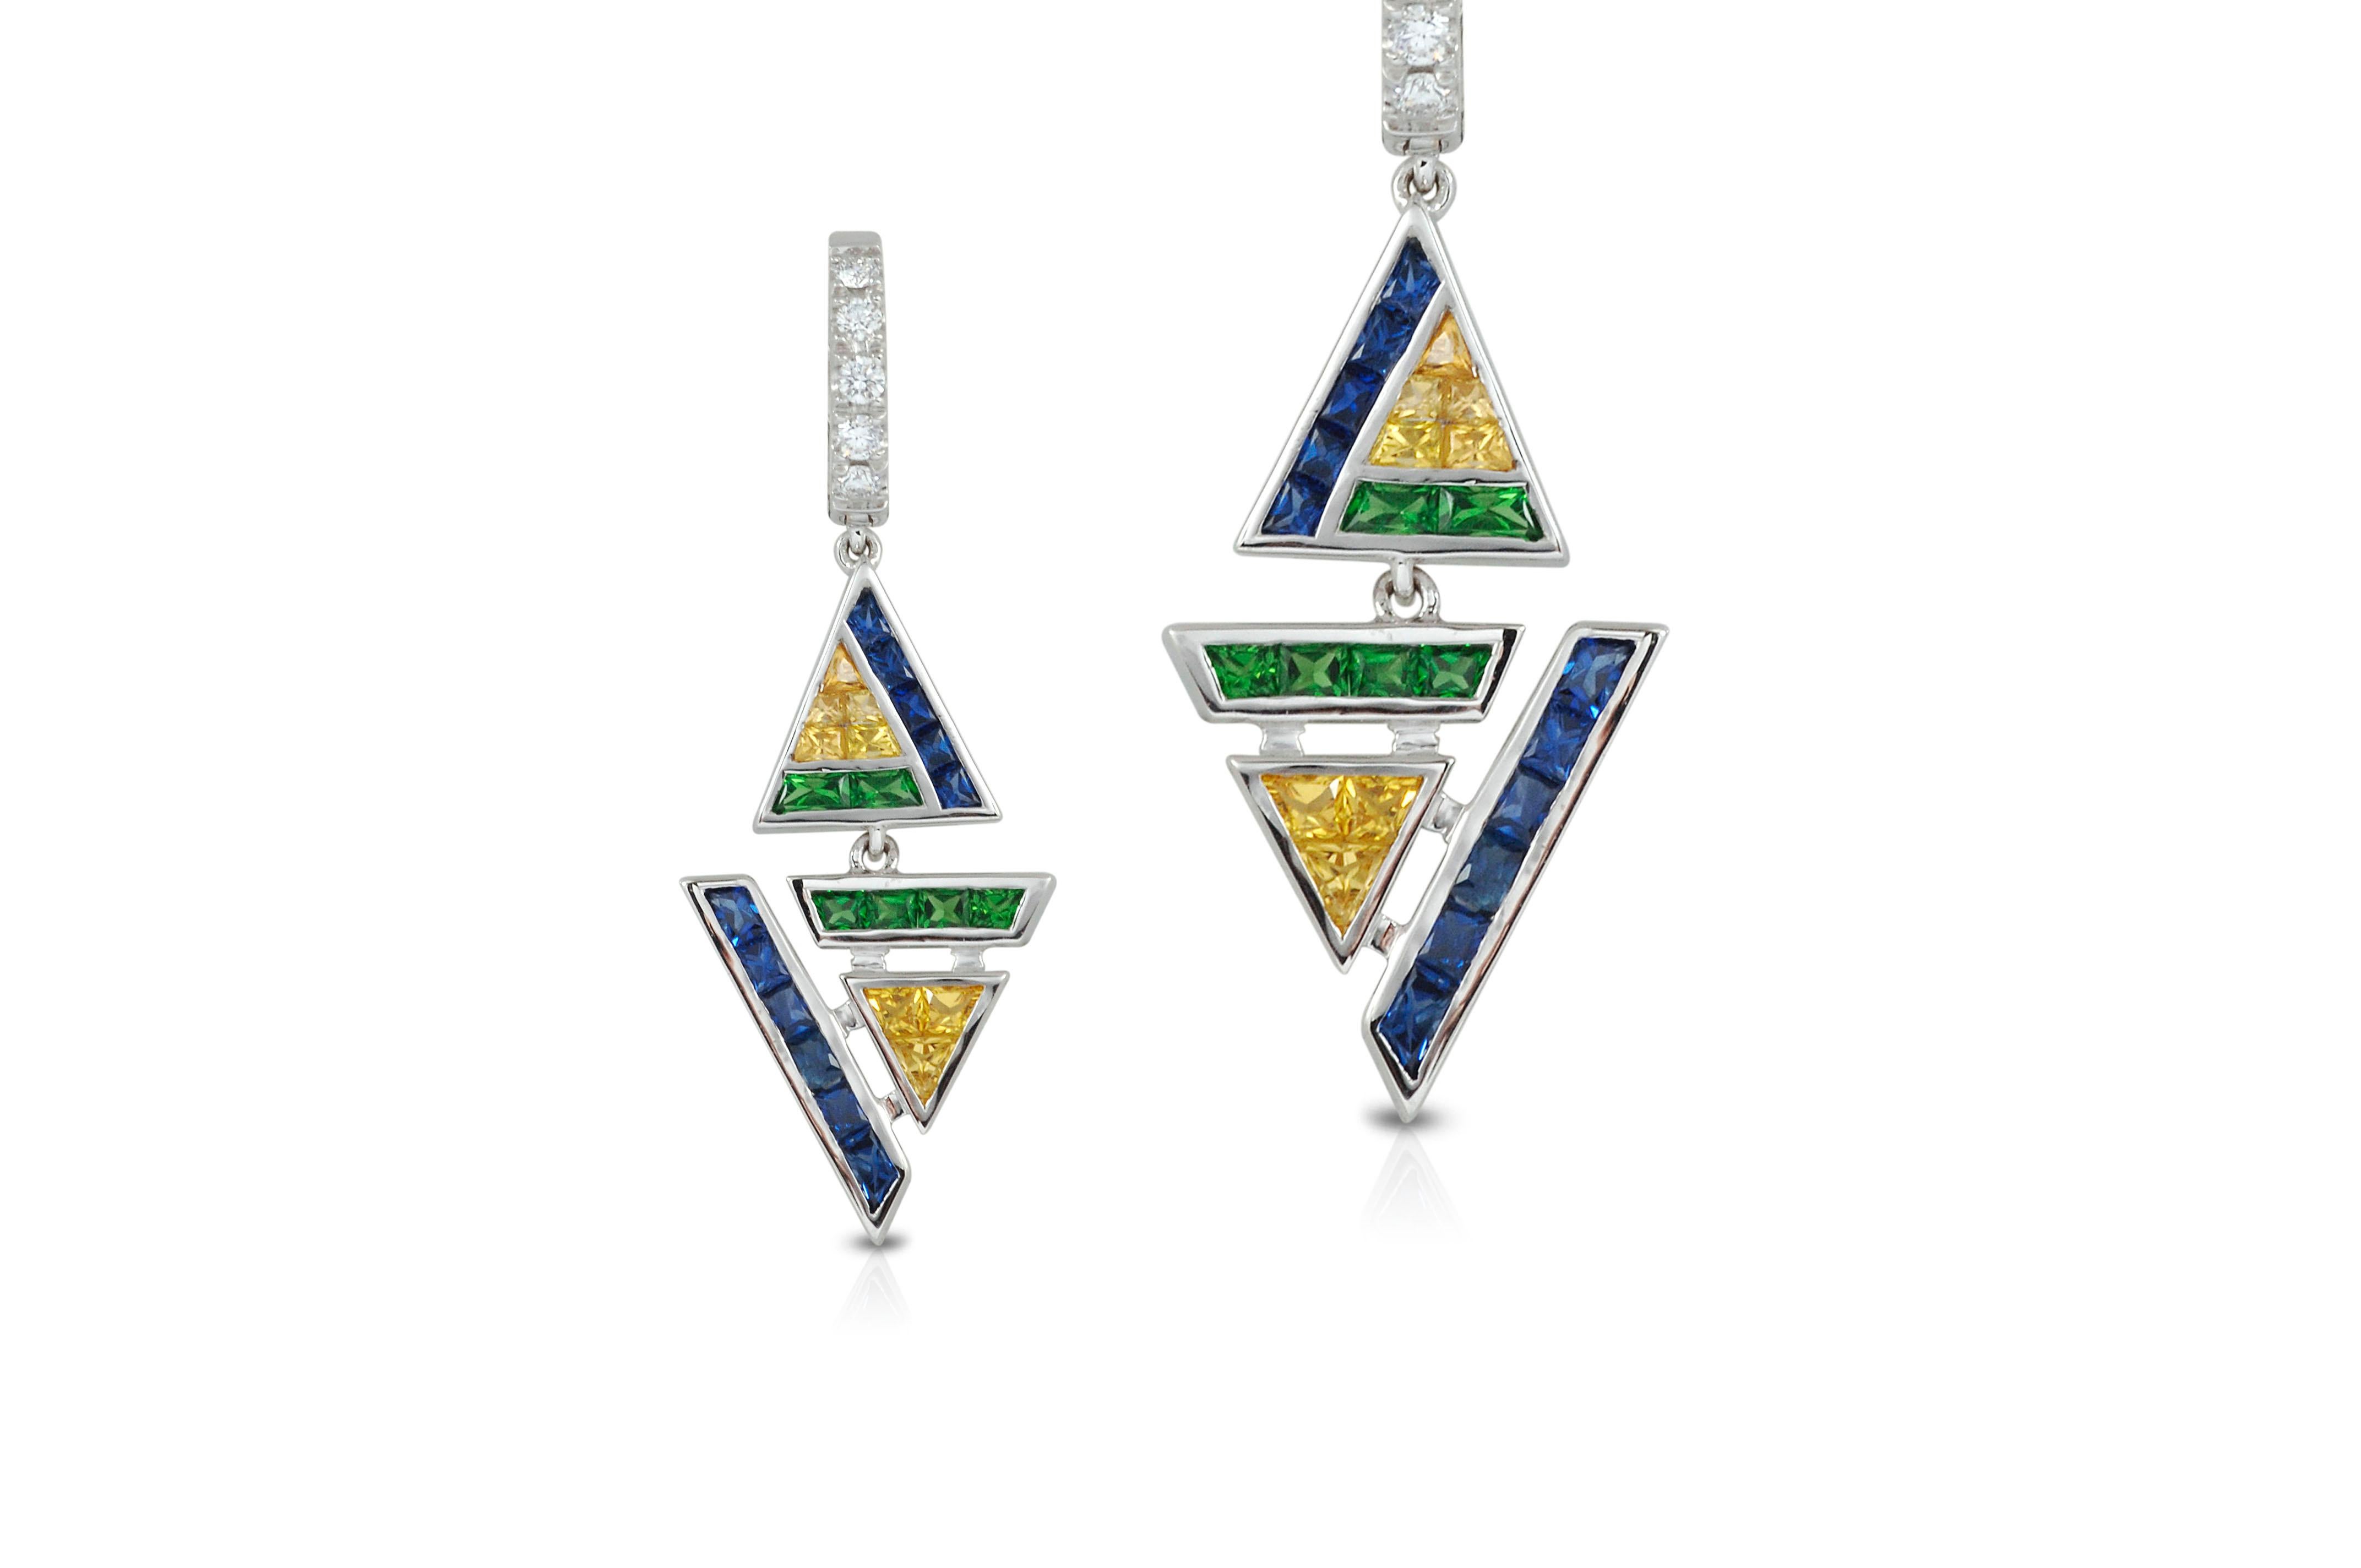 Geoart Back to Basic Puzzle Sapphire, Tsavorite, Diamond Earrings 18k White Gold In New Condition For Sale In Bangkok, 10